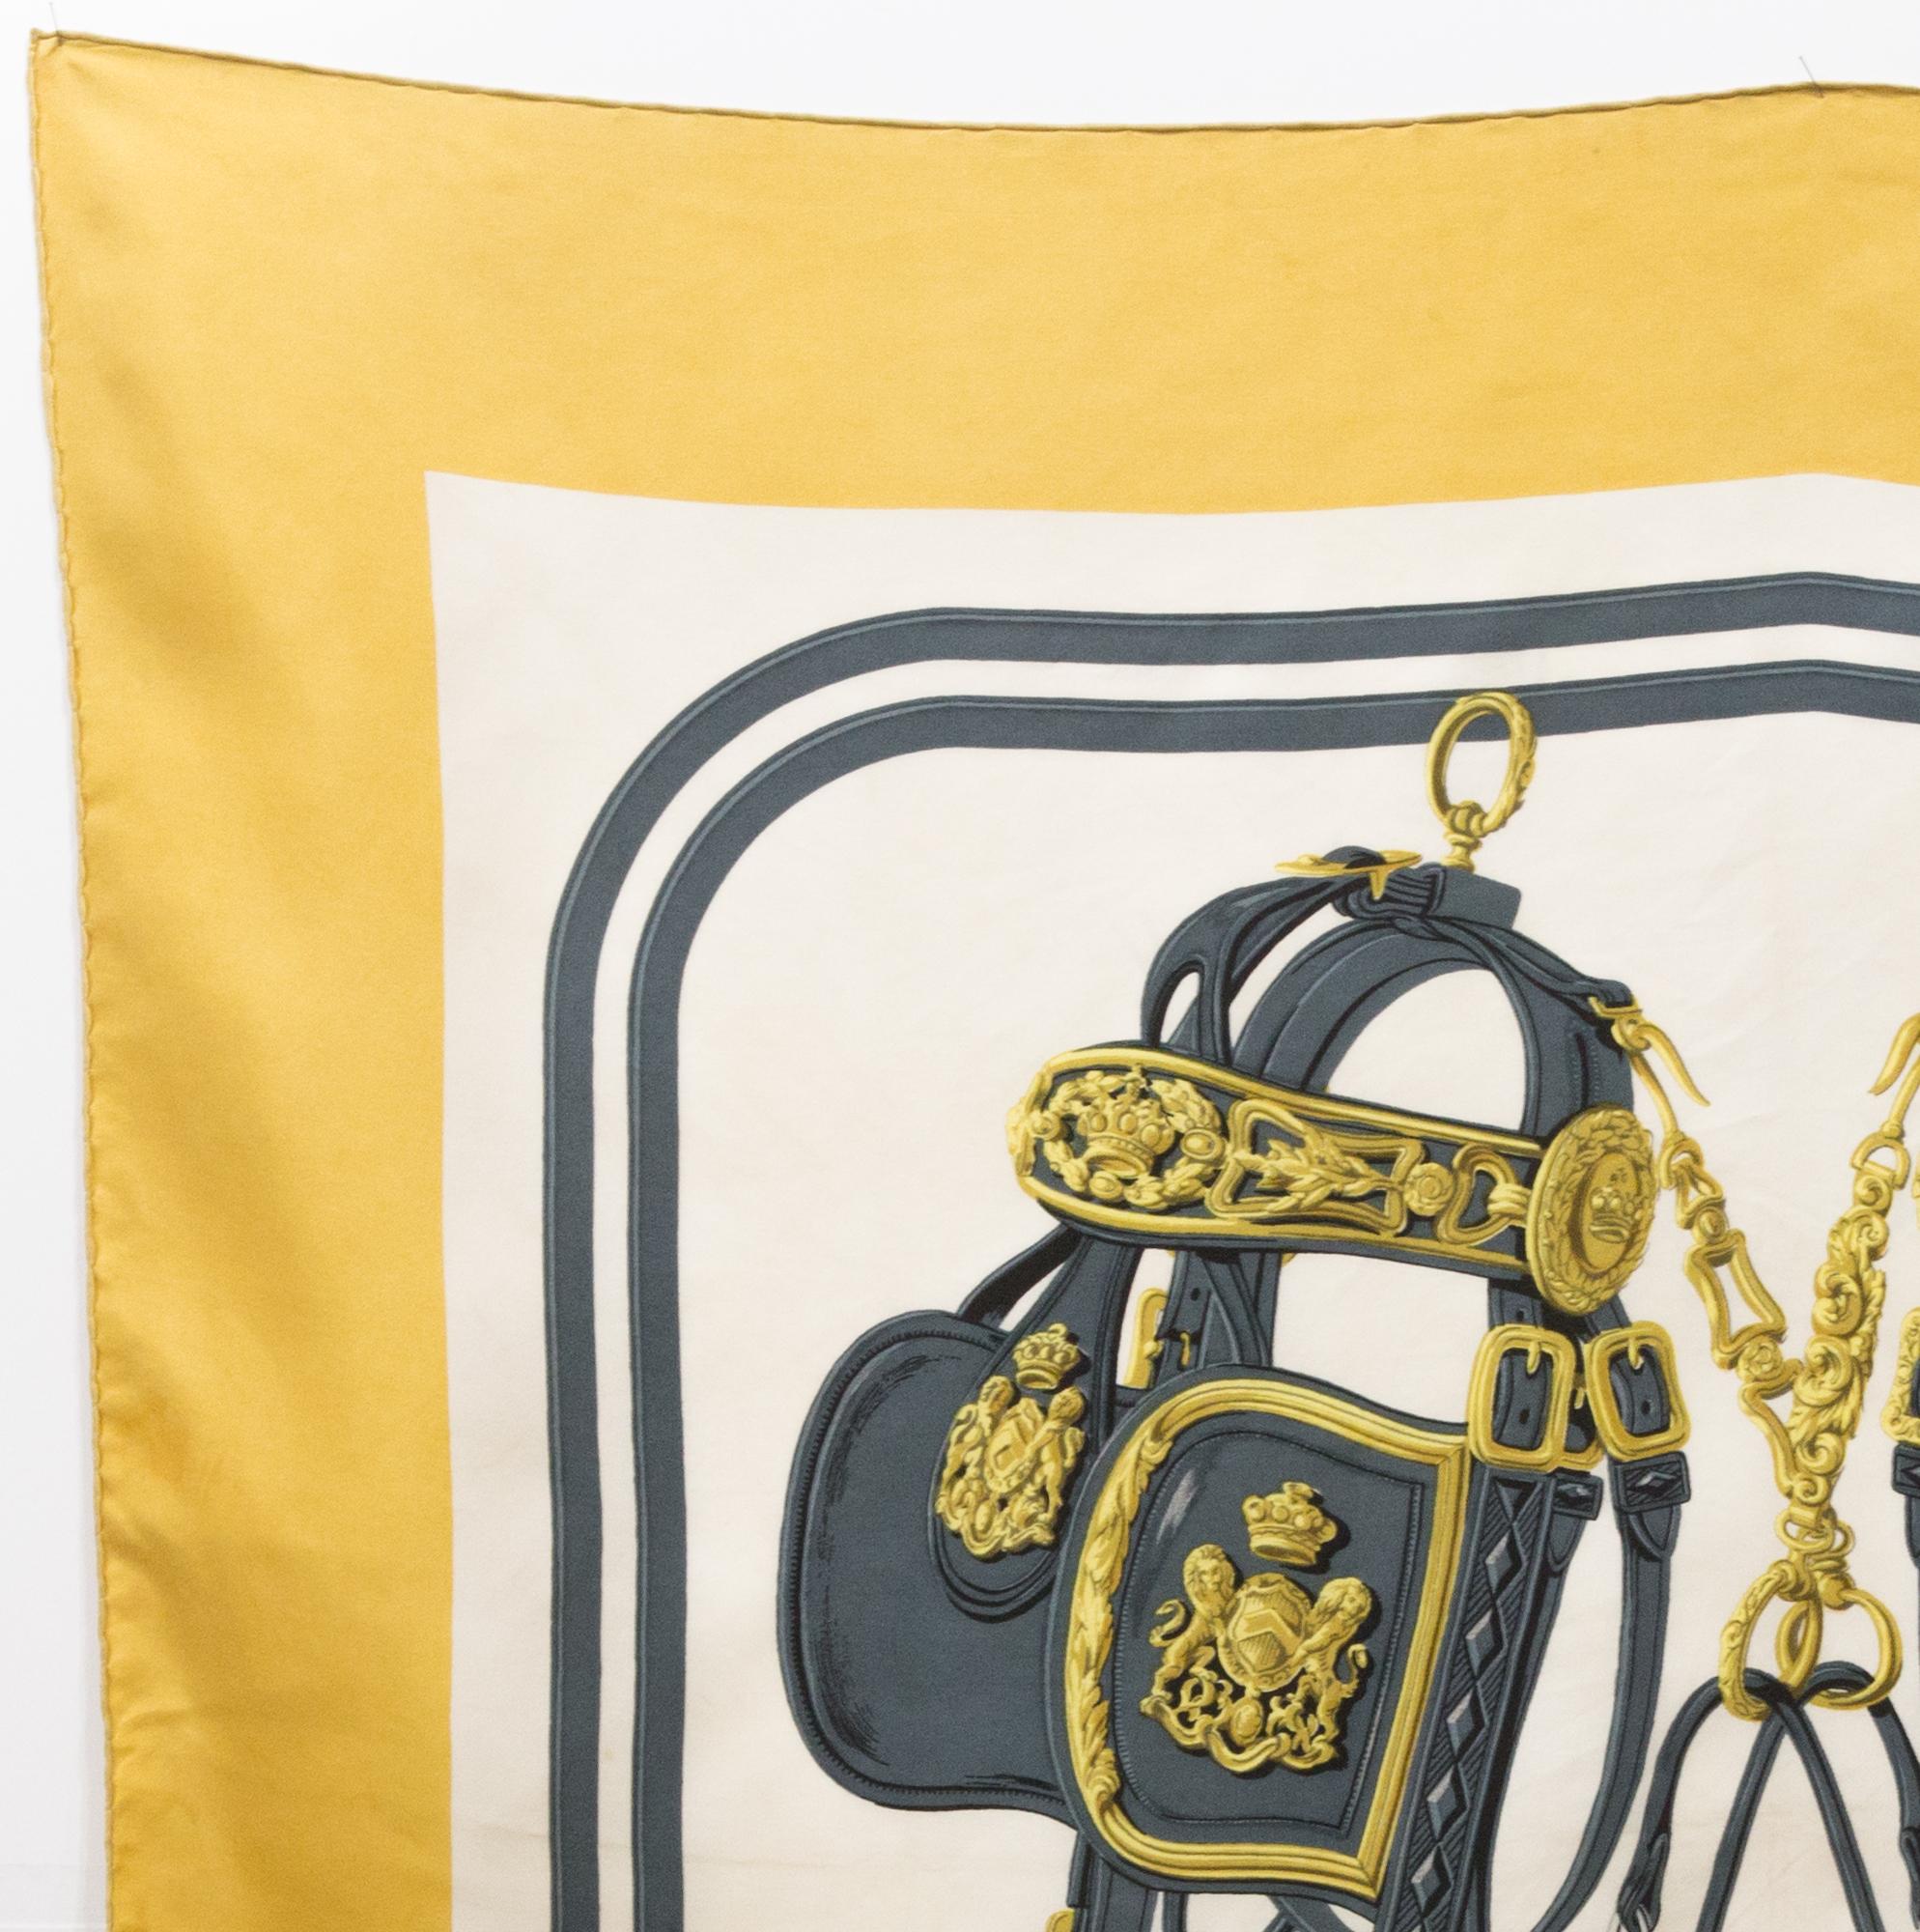 Hermès brides de gala by Hugo Grygkar silk scarf featuring a yellow border, a Hermès signature. 
Circa 1959
In good vintage condition. Made in France.
35,4in. (90cm)  X 35,4in. (90cm)
We guarantee you will receive this  iconic item as described and